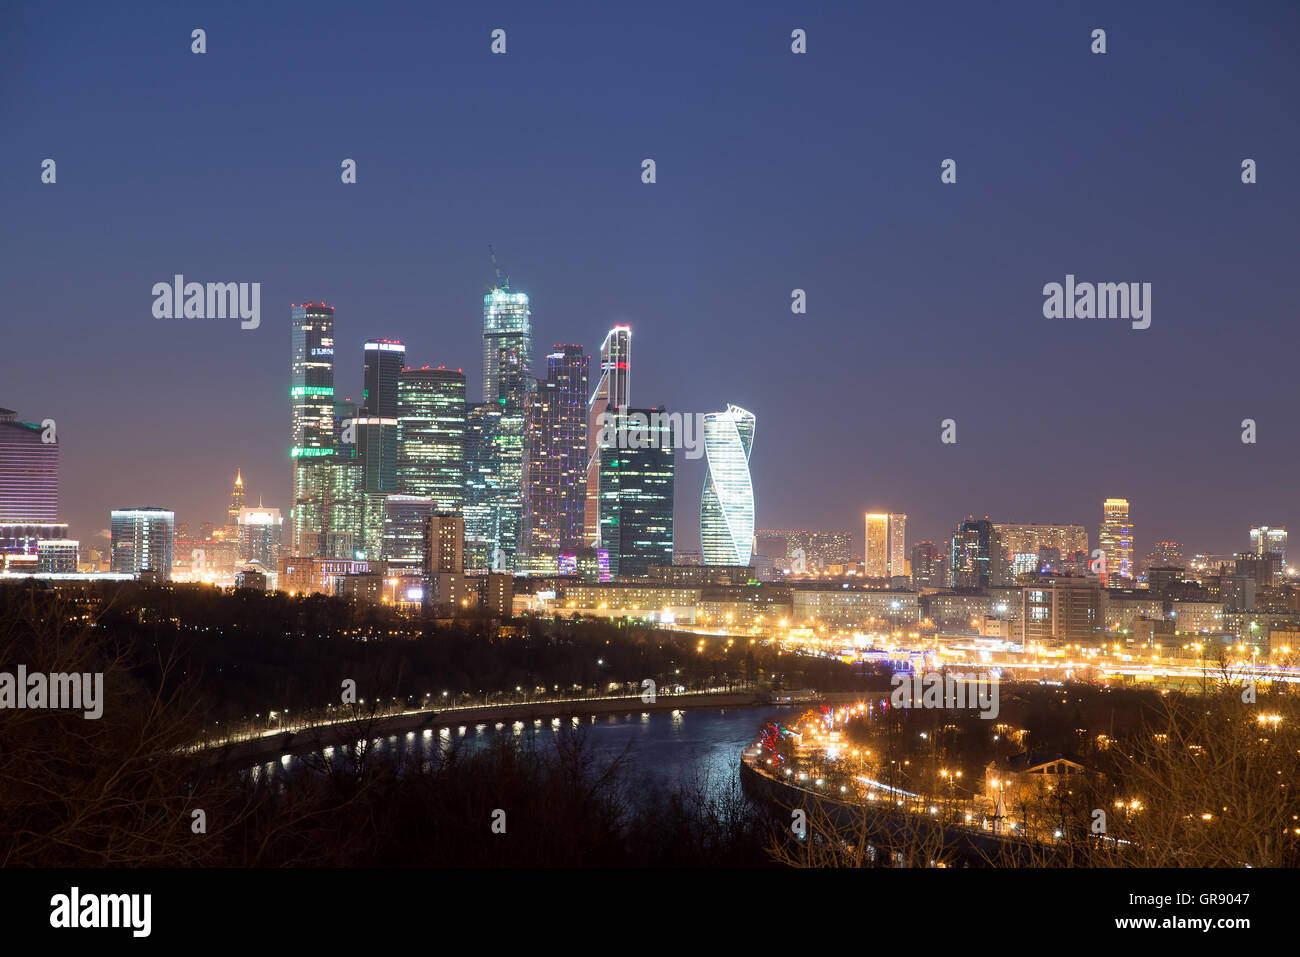 Moscow International Business Center - Moscow City at night. View from the observation platform on the Sparrow Hills. Stock Photo